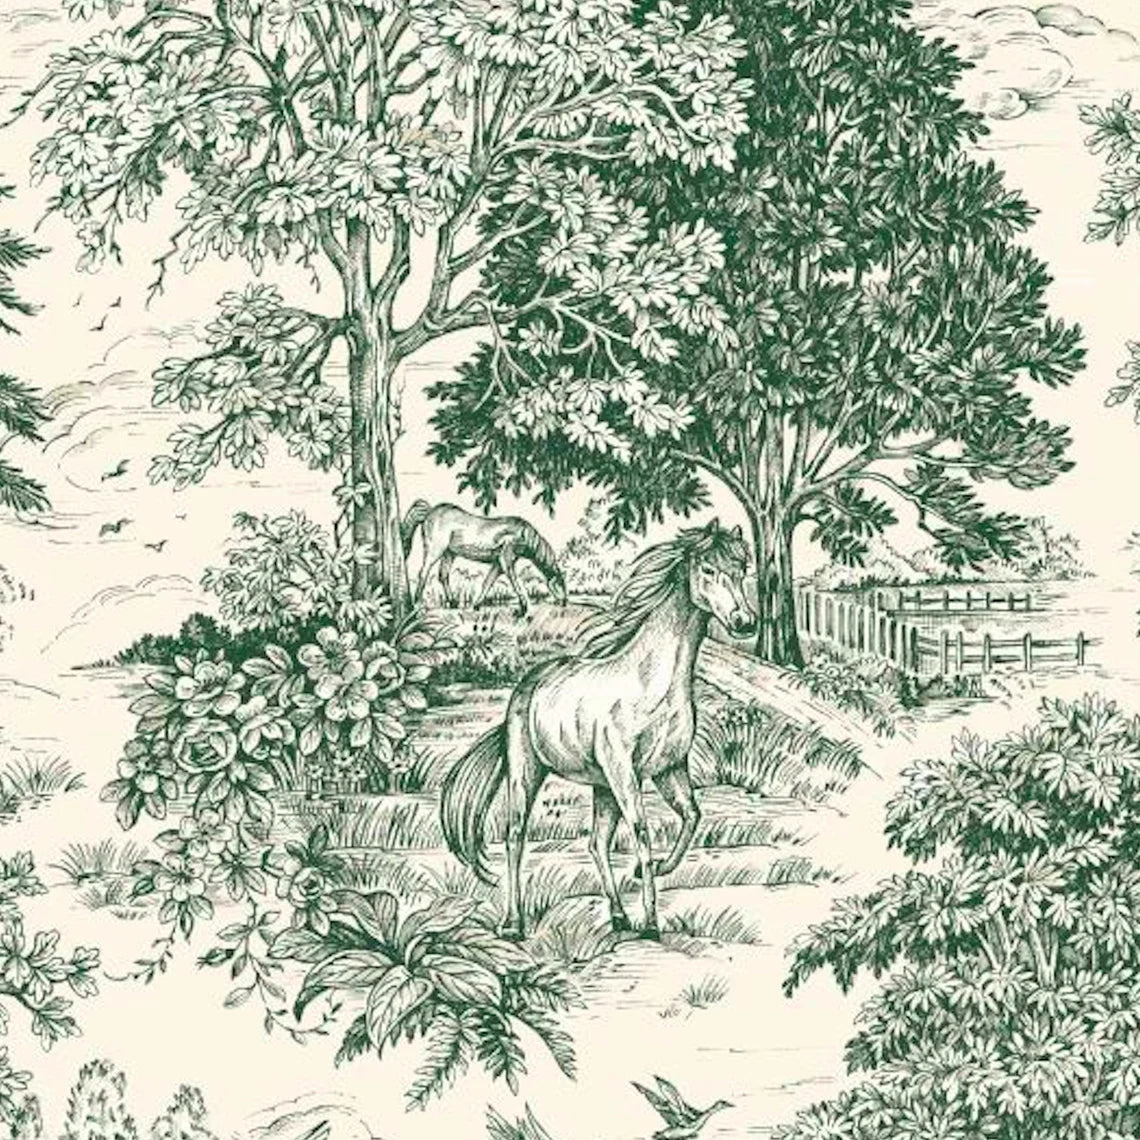 gathered crib skirt in Yellowstone Classic Green Country Toile- Horses, Deer, Dogs- Large Scale